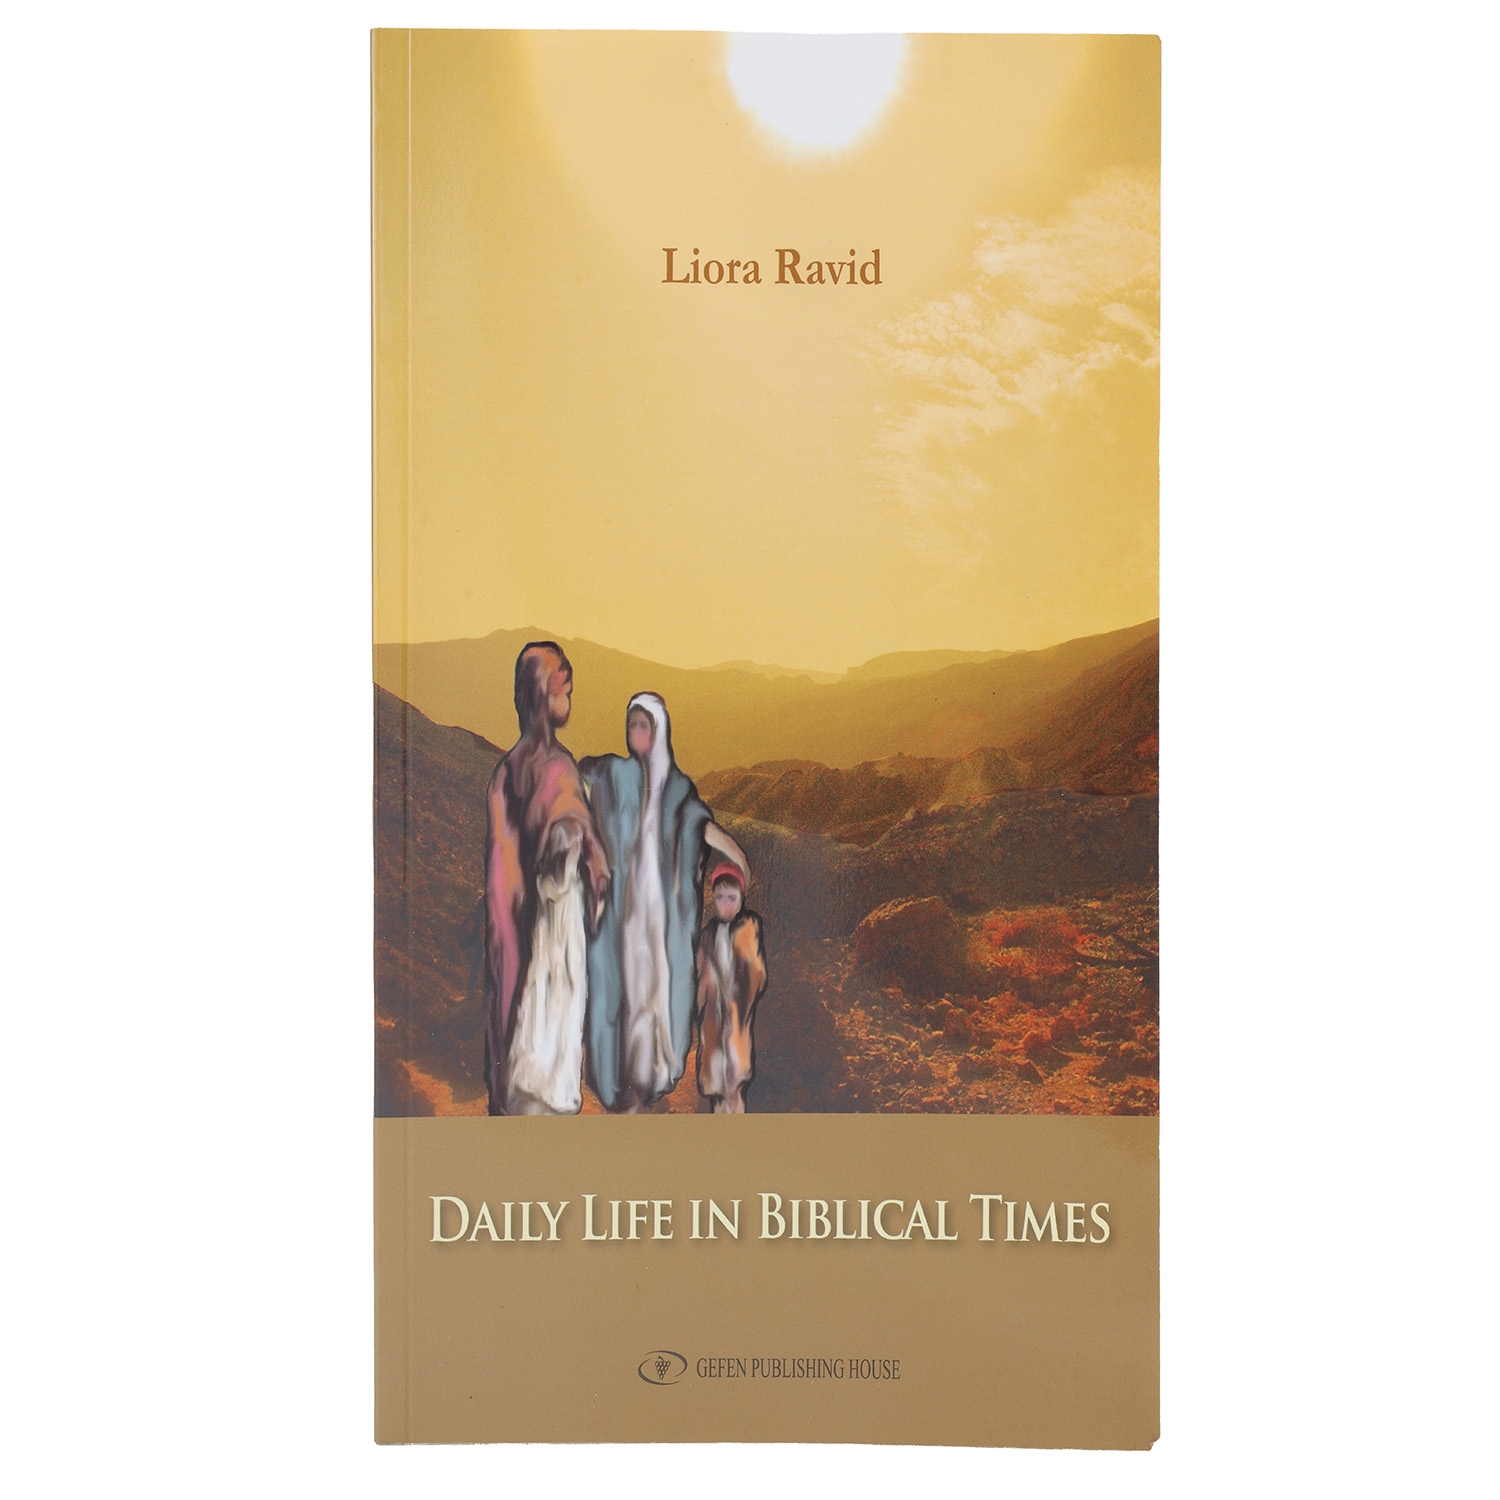 Daily Life in Biblical Times - Book by Liora Ravid - 1